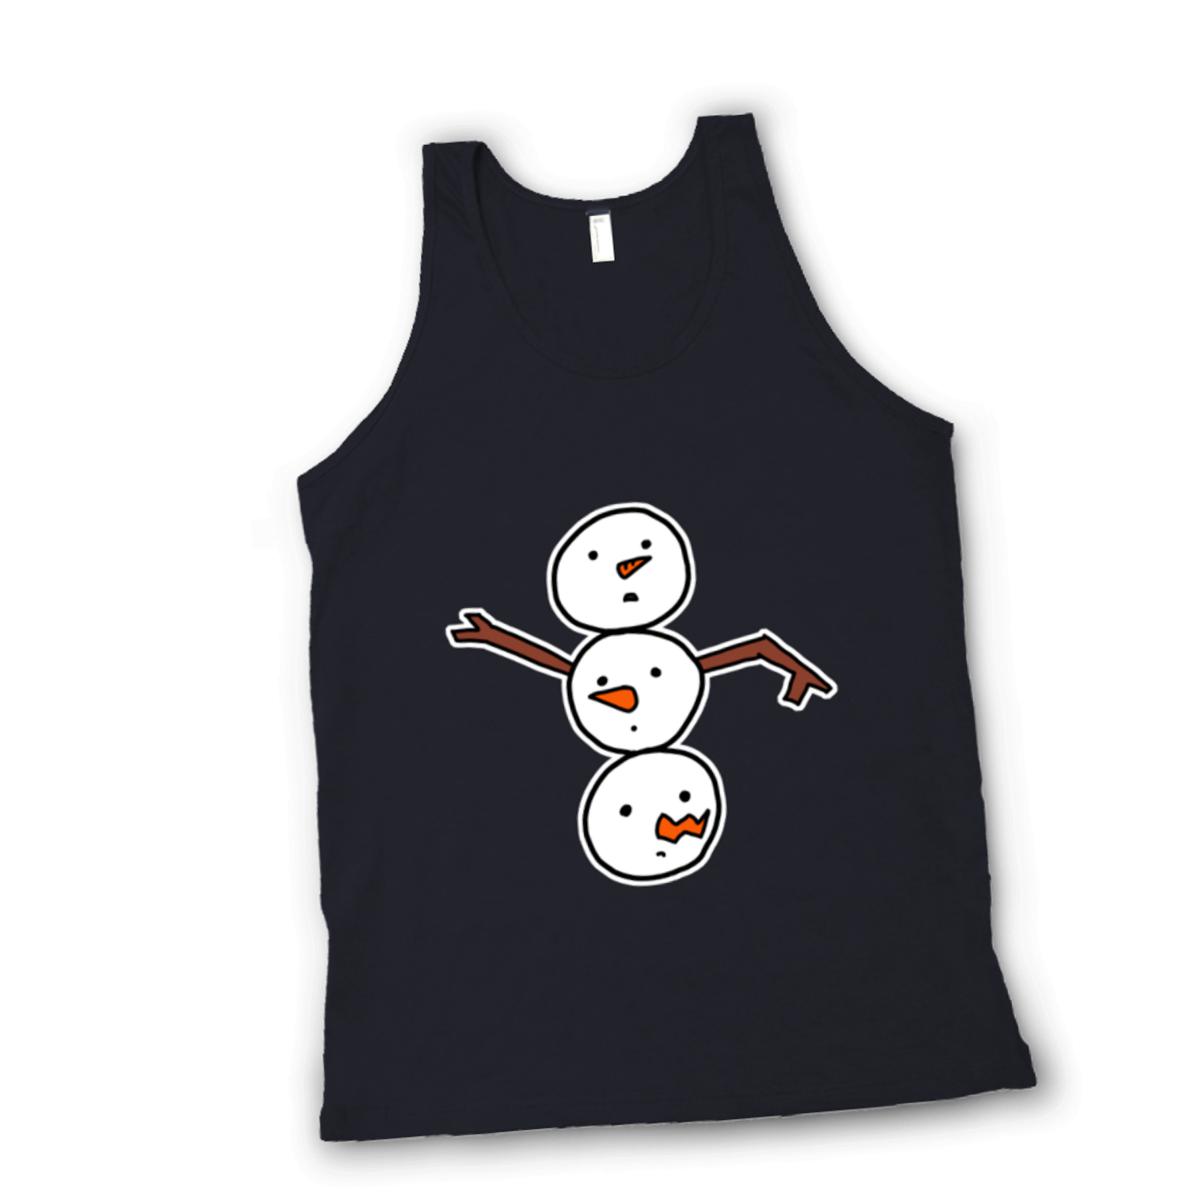 Snowman All Heads Unisex Tank Top Double Extra Large black